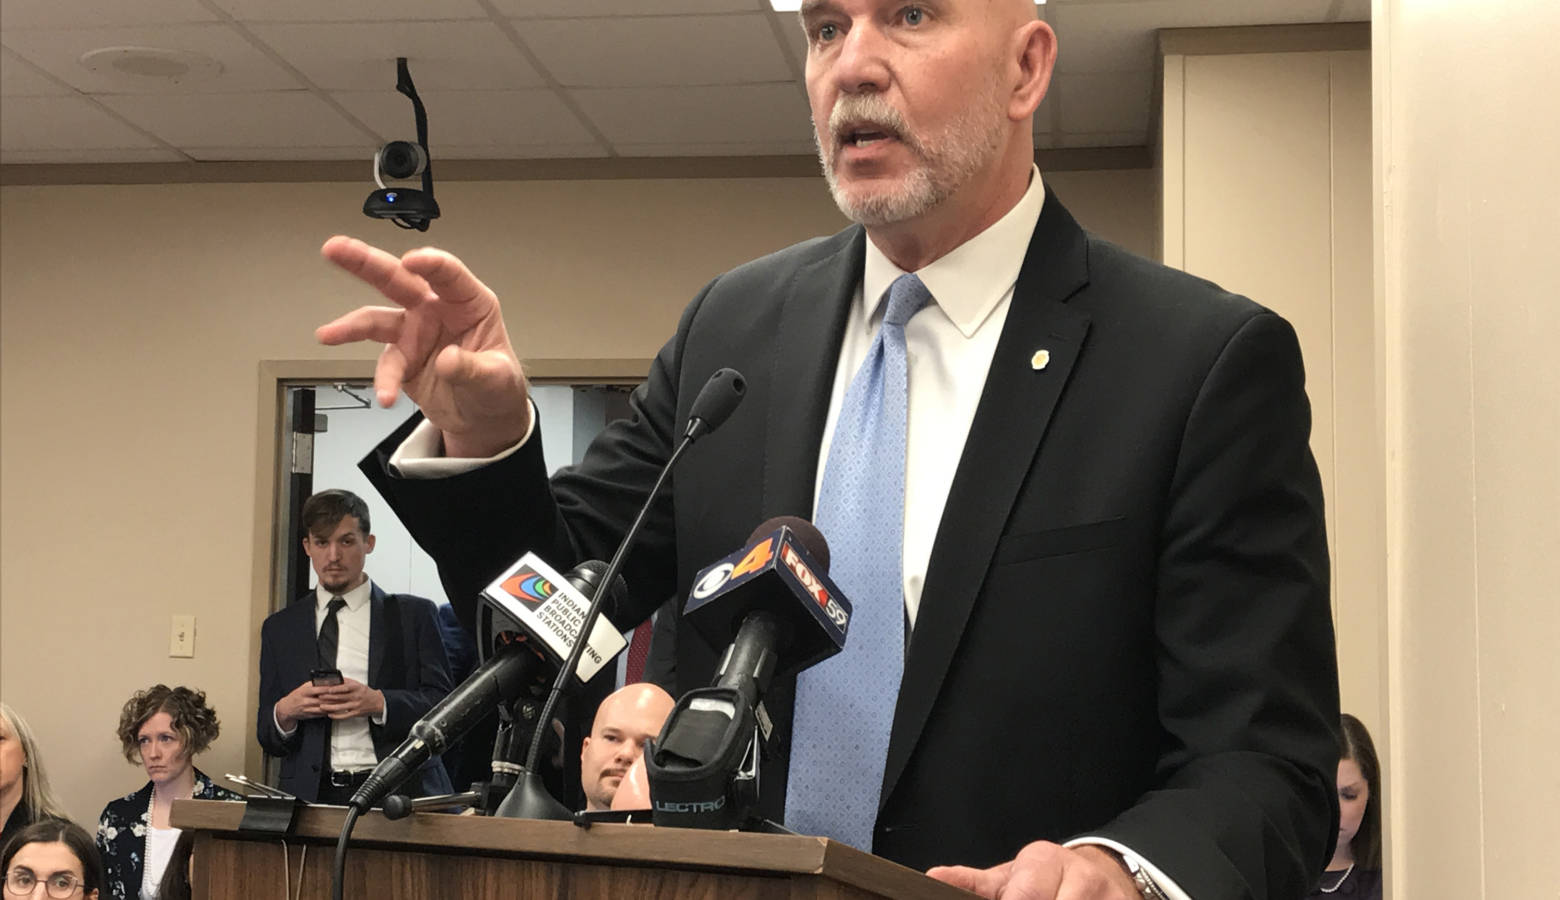 Second Amendment Attorney Guy Relford argues all the bill would do is provide immunity from civil charges if they use reasonable force to defend themselves, their property, or another person. (Brandon Smith/IPB News)